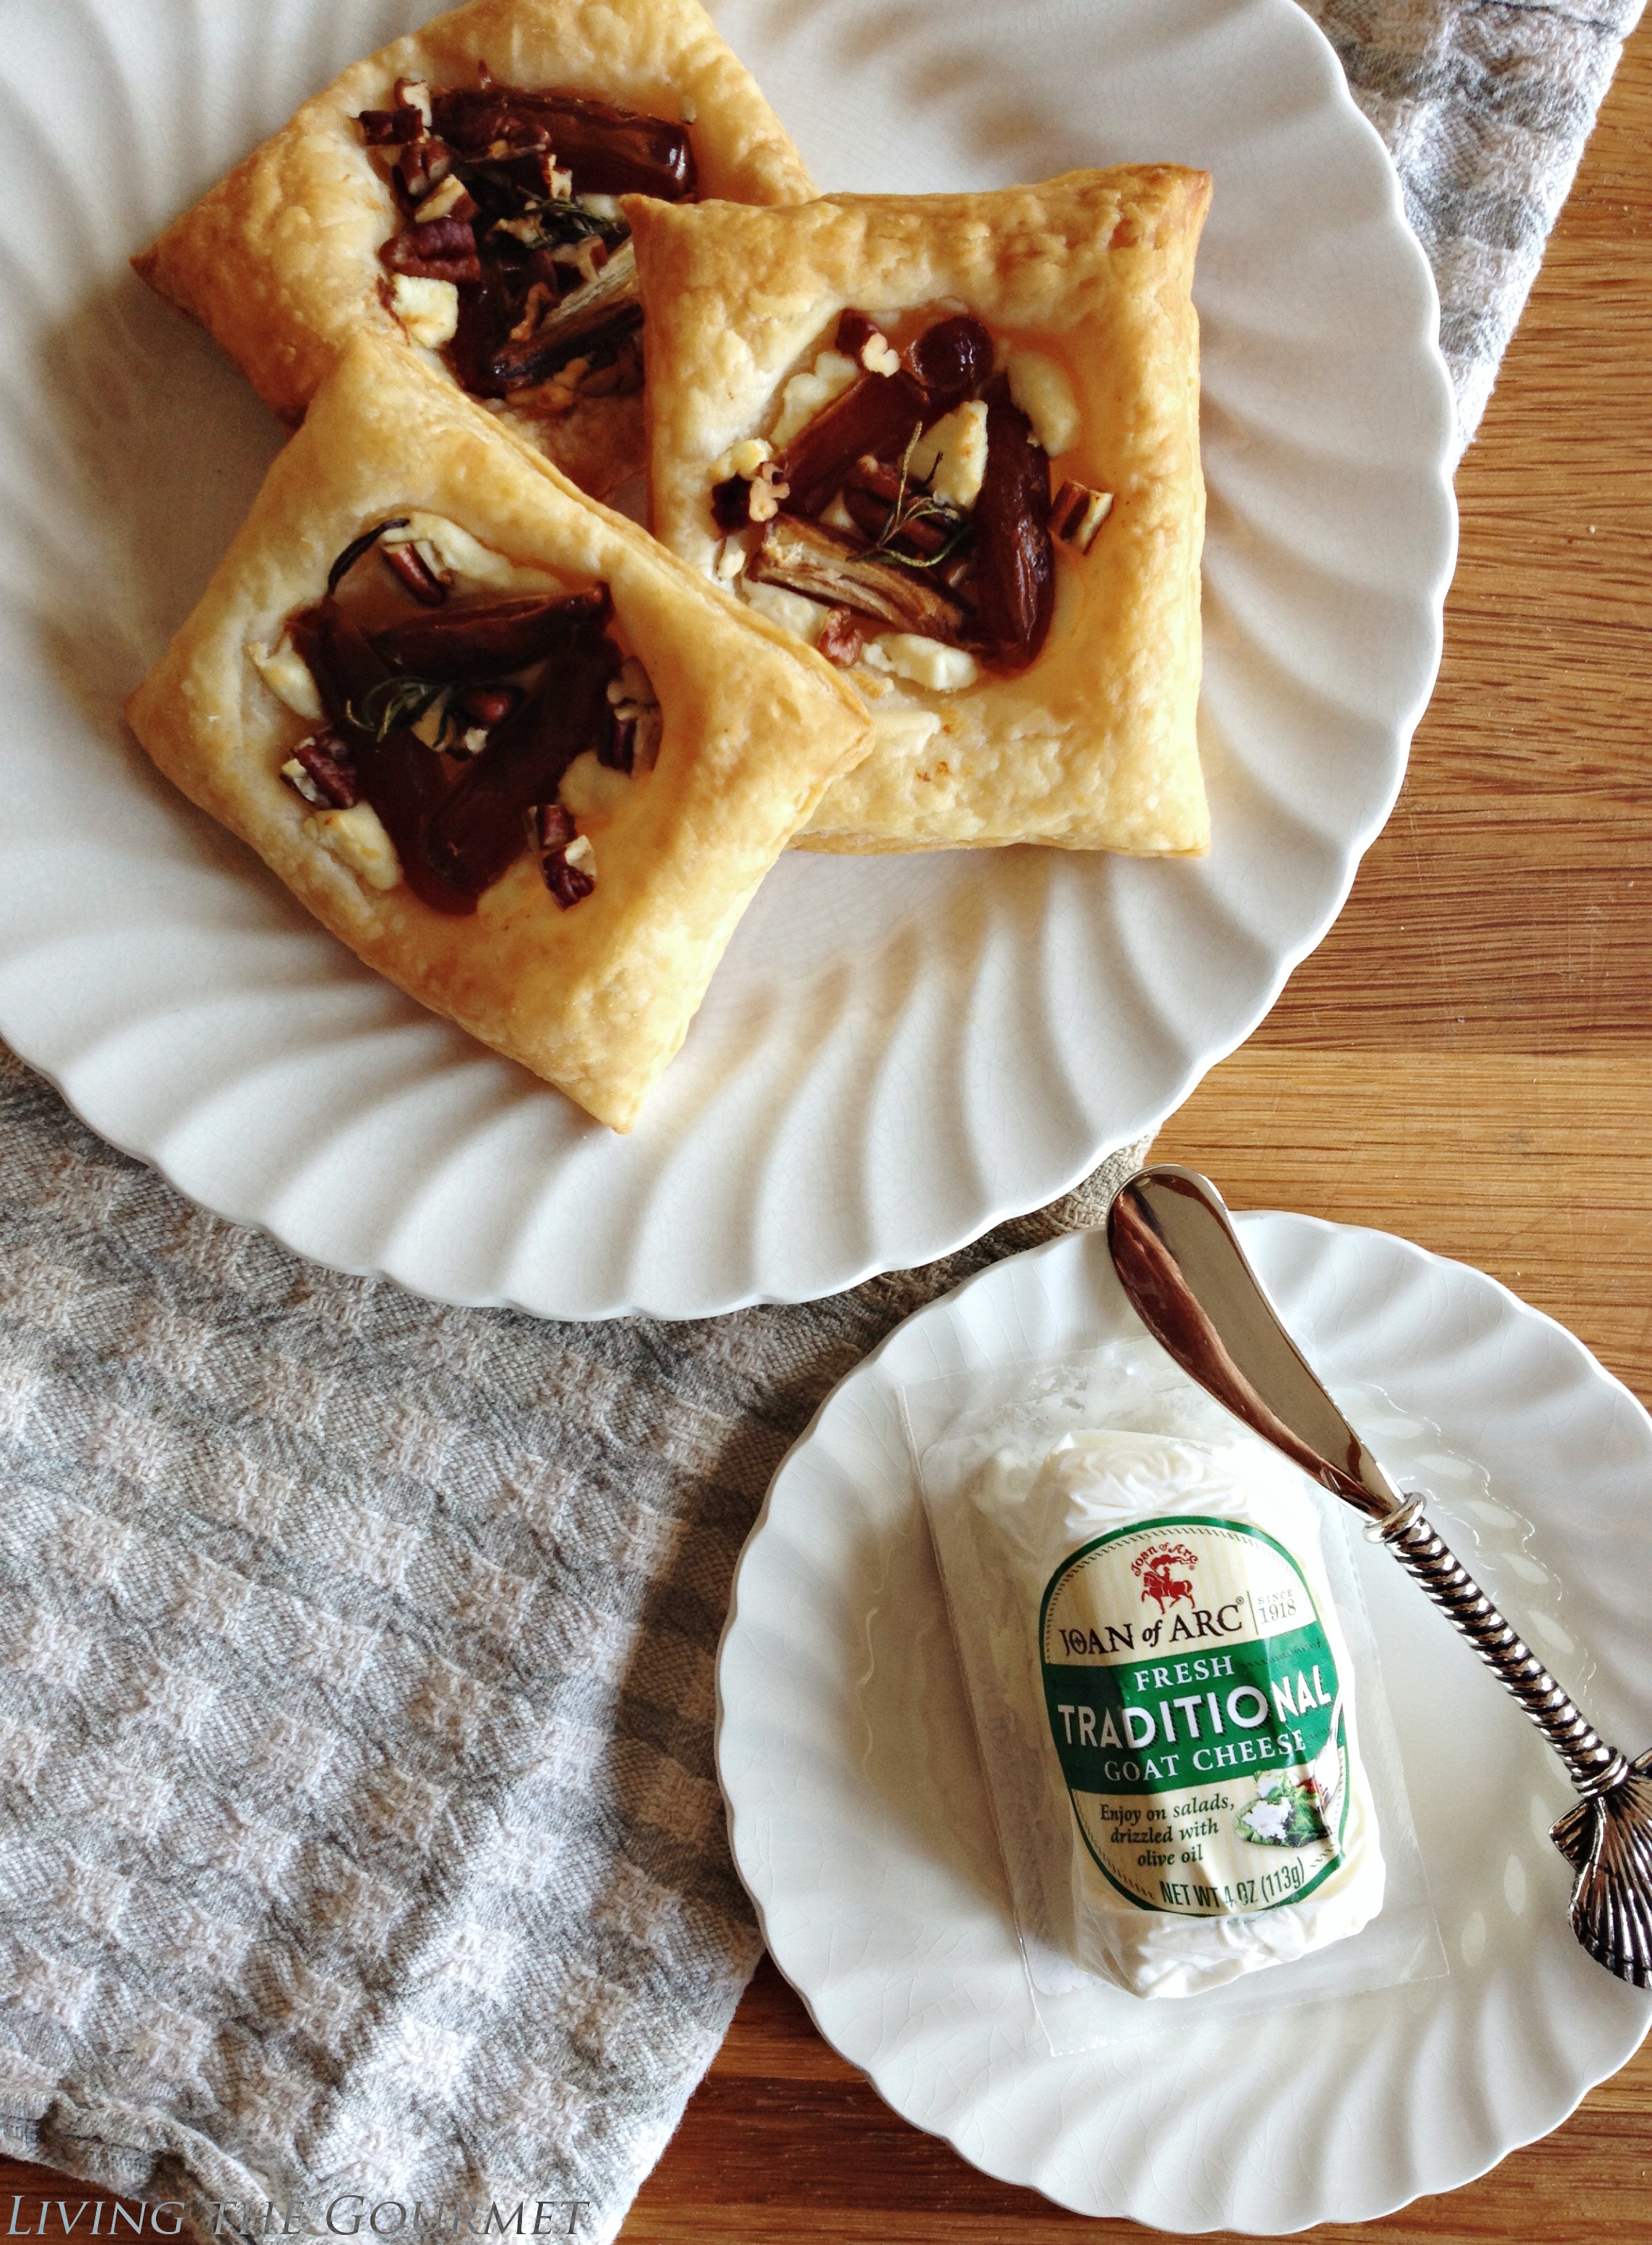 Living the Gourmet: Goat Cheese Tarts & $25 Giveaway